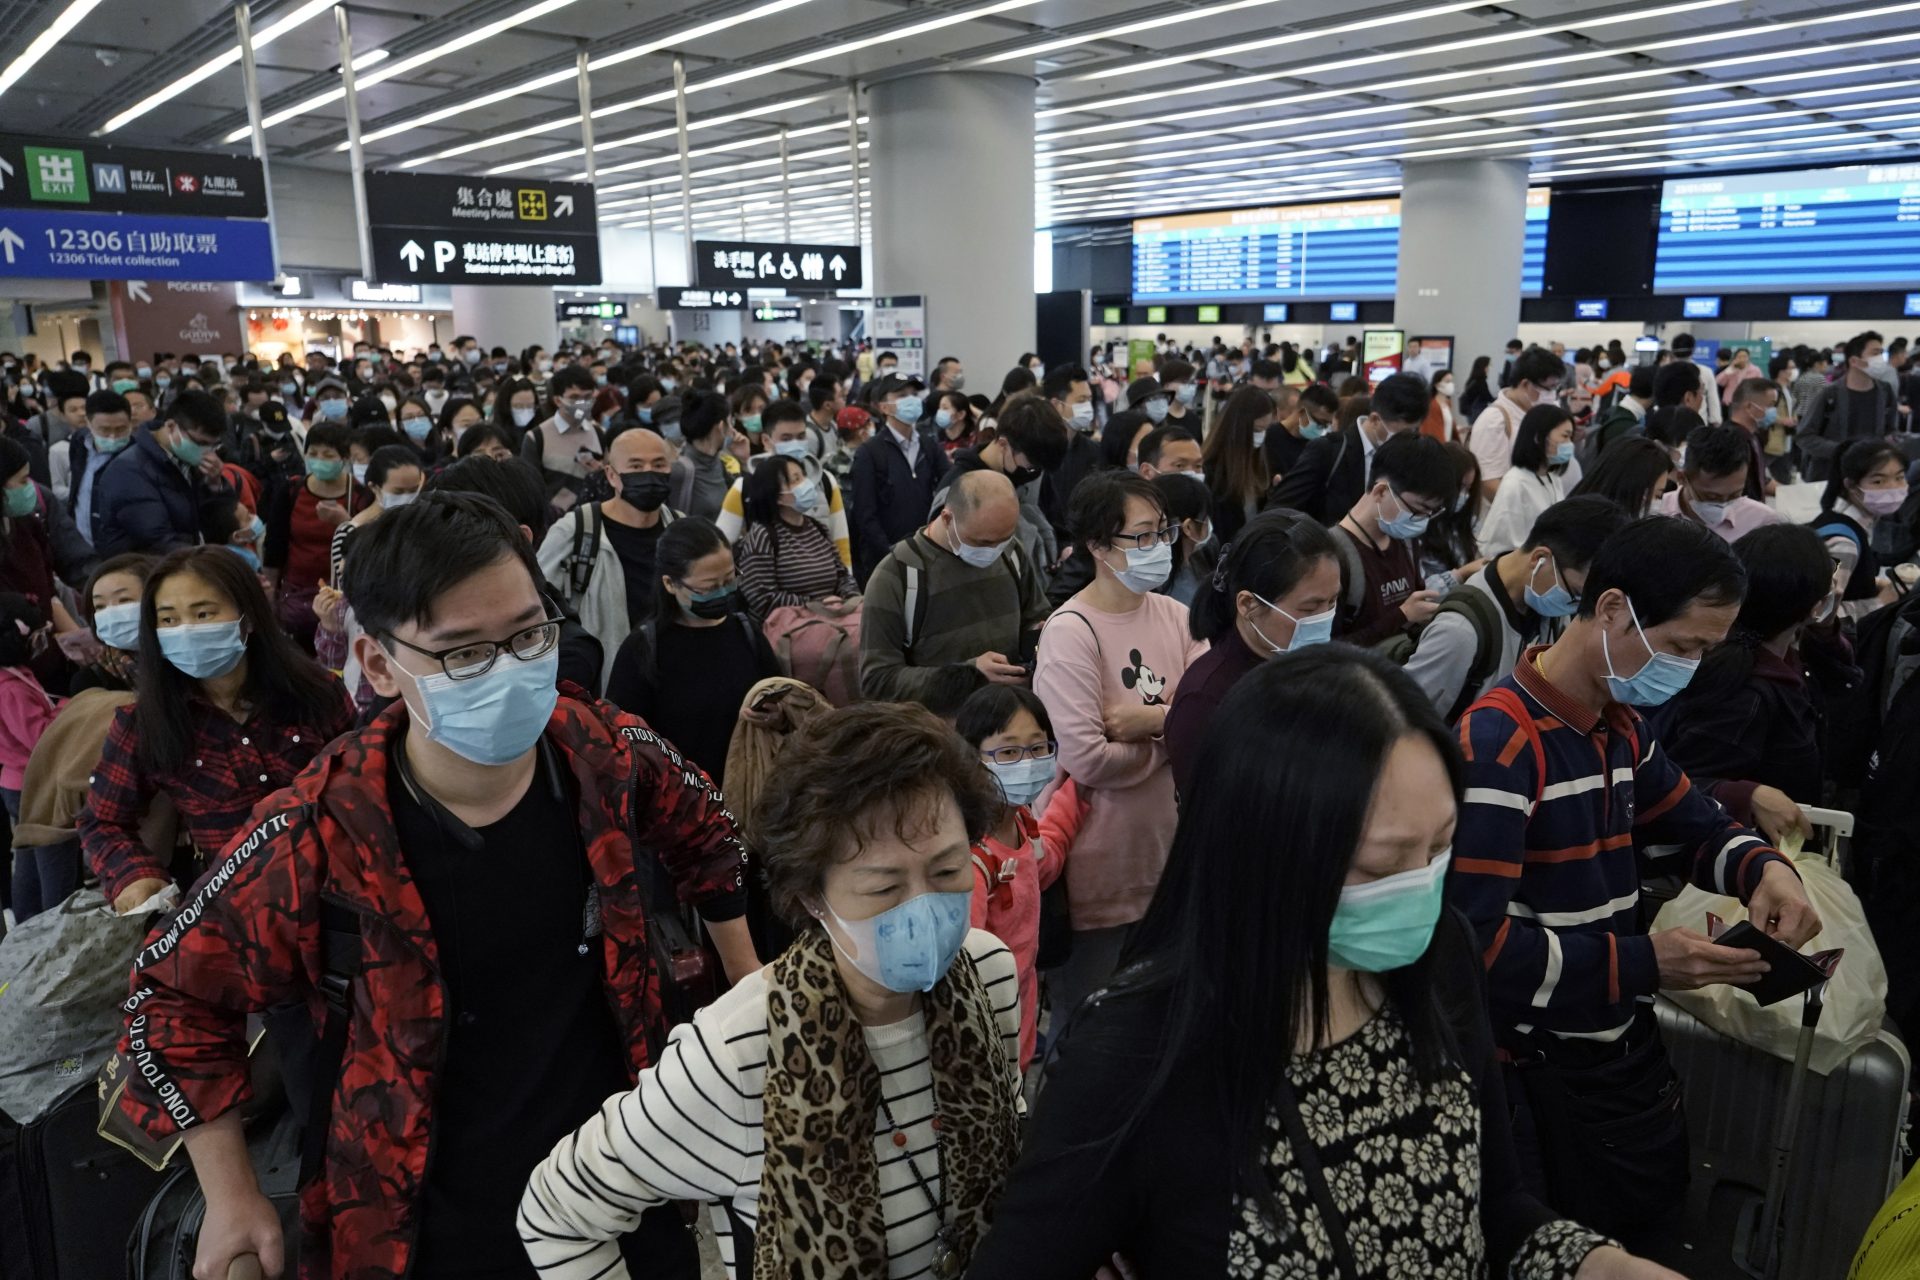 FILE - In this Thursday, Jan. 23, 2020 file photo, Passengers wear protective face masks at the departure hall of the high speed train station in Hong Kong. Fear about the effects of a new virus found in China is spreading faster through financial markets around the world than the sickness itself. U.S. stocks fell to their biggest weekly loss since early October on worries that the new coronavirus could ultimately hurt travel and global economic growth.